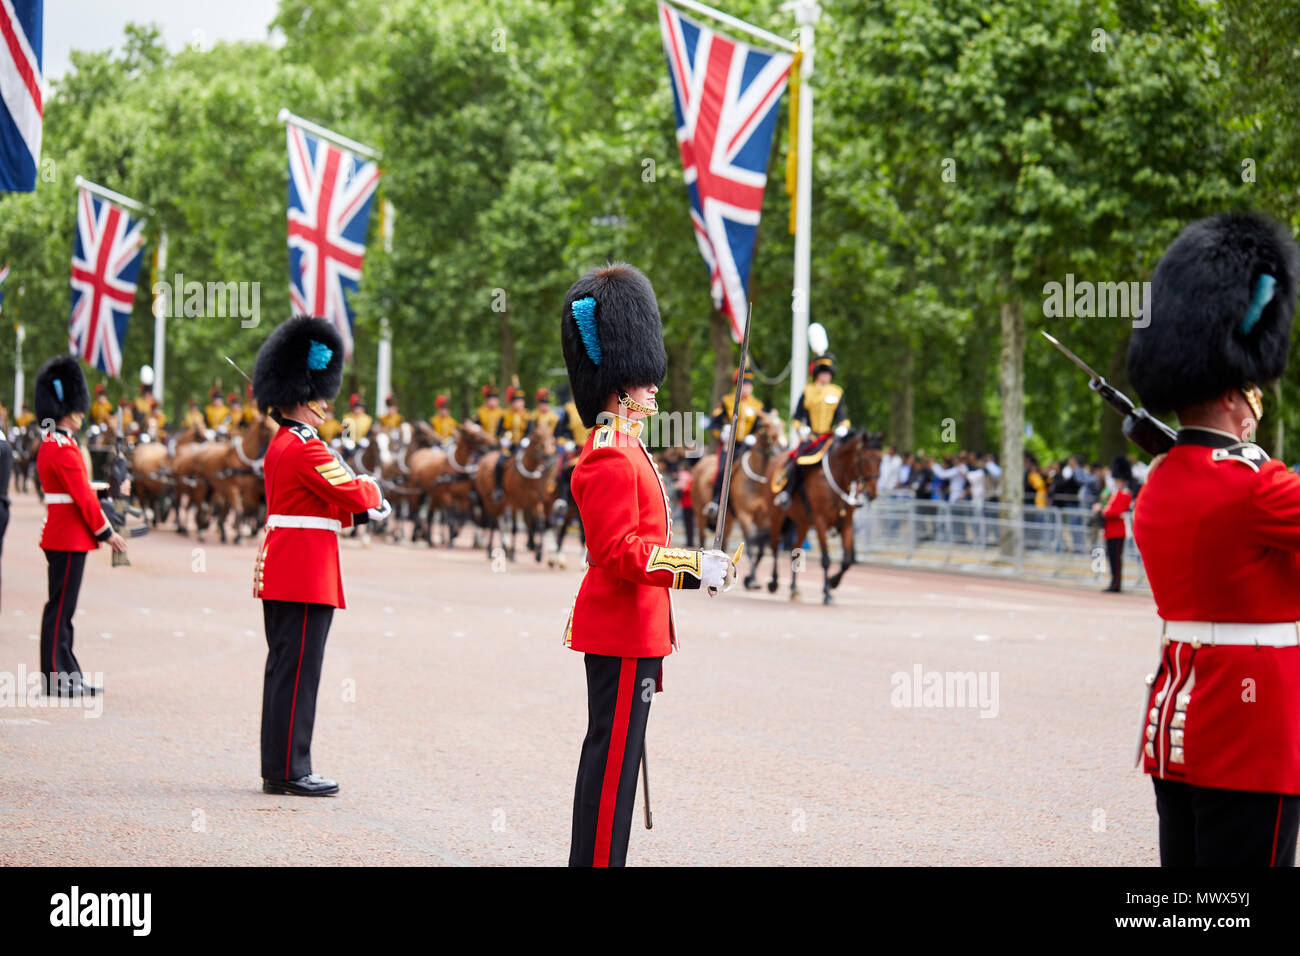 London, UK. 2nd June 2018. Image of members of the armed forces in ceremonial uniform on duty during the Colonel's Review. The Colonel's Review is the second rehearsal for the Trooping the Colour parade. Taken on The Mall, London. Credit: Kevin Frost/Alamy Live News Stock Photo